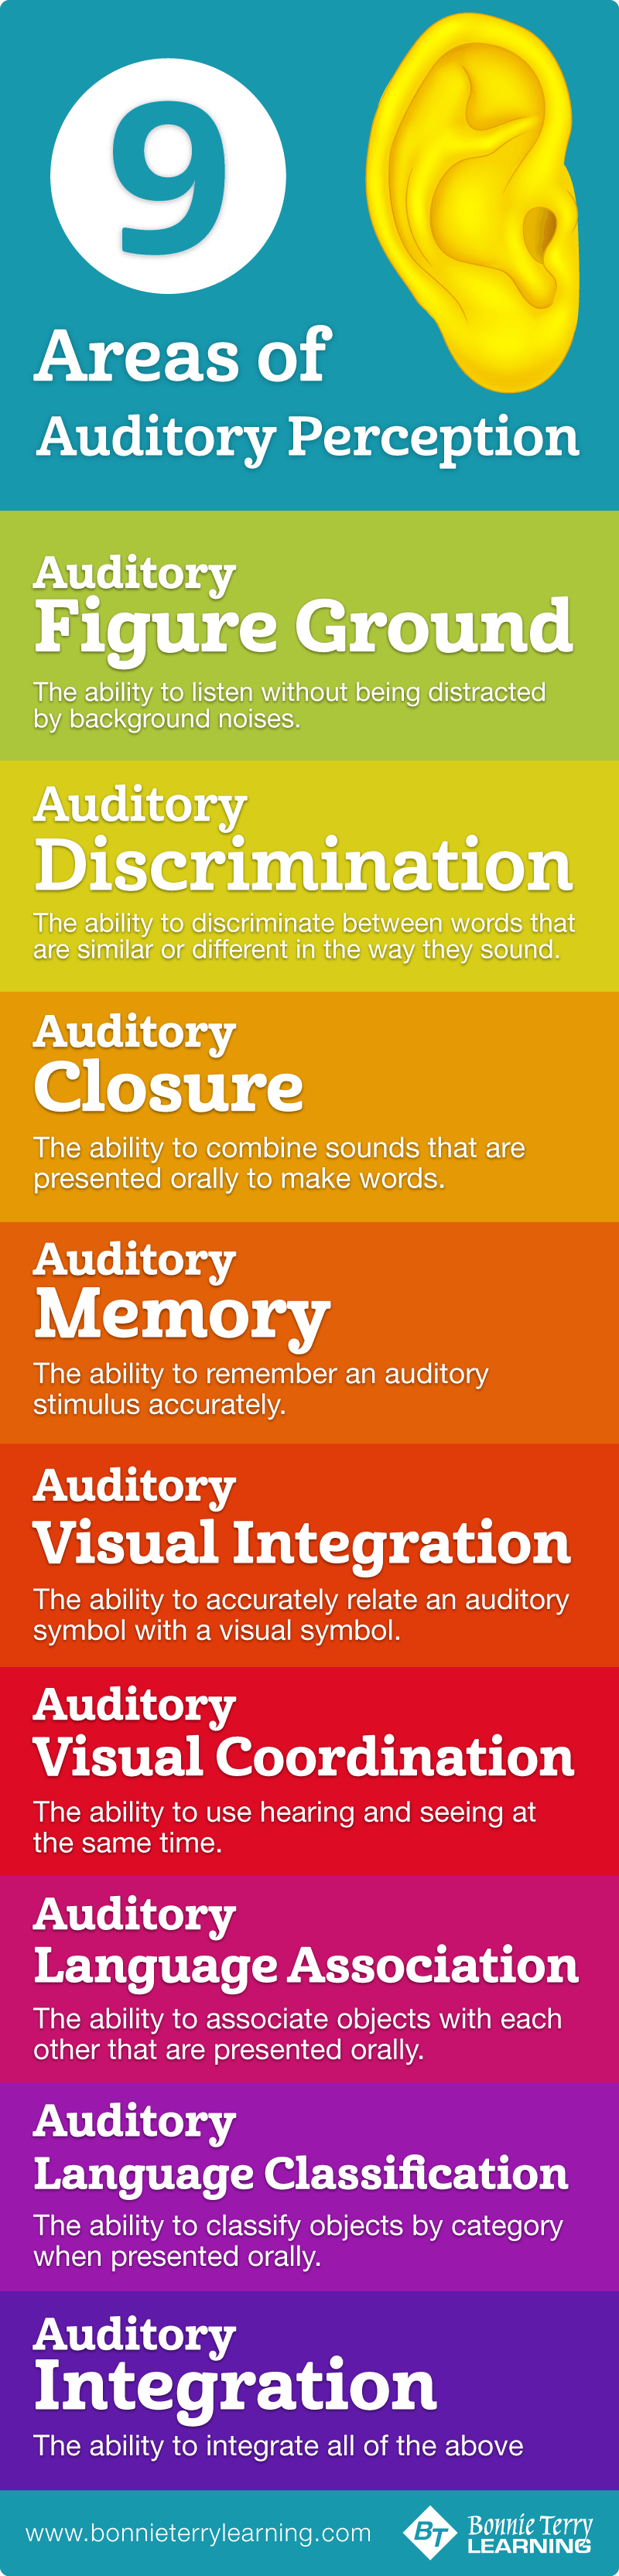 Areas of Auditory Processing / Perception